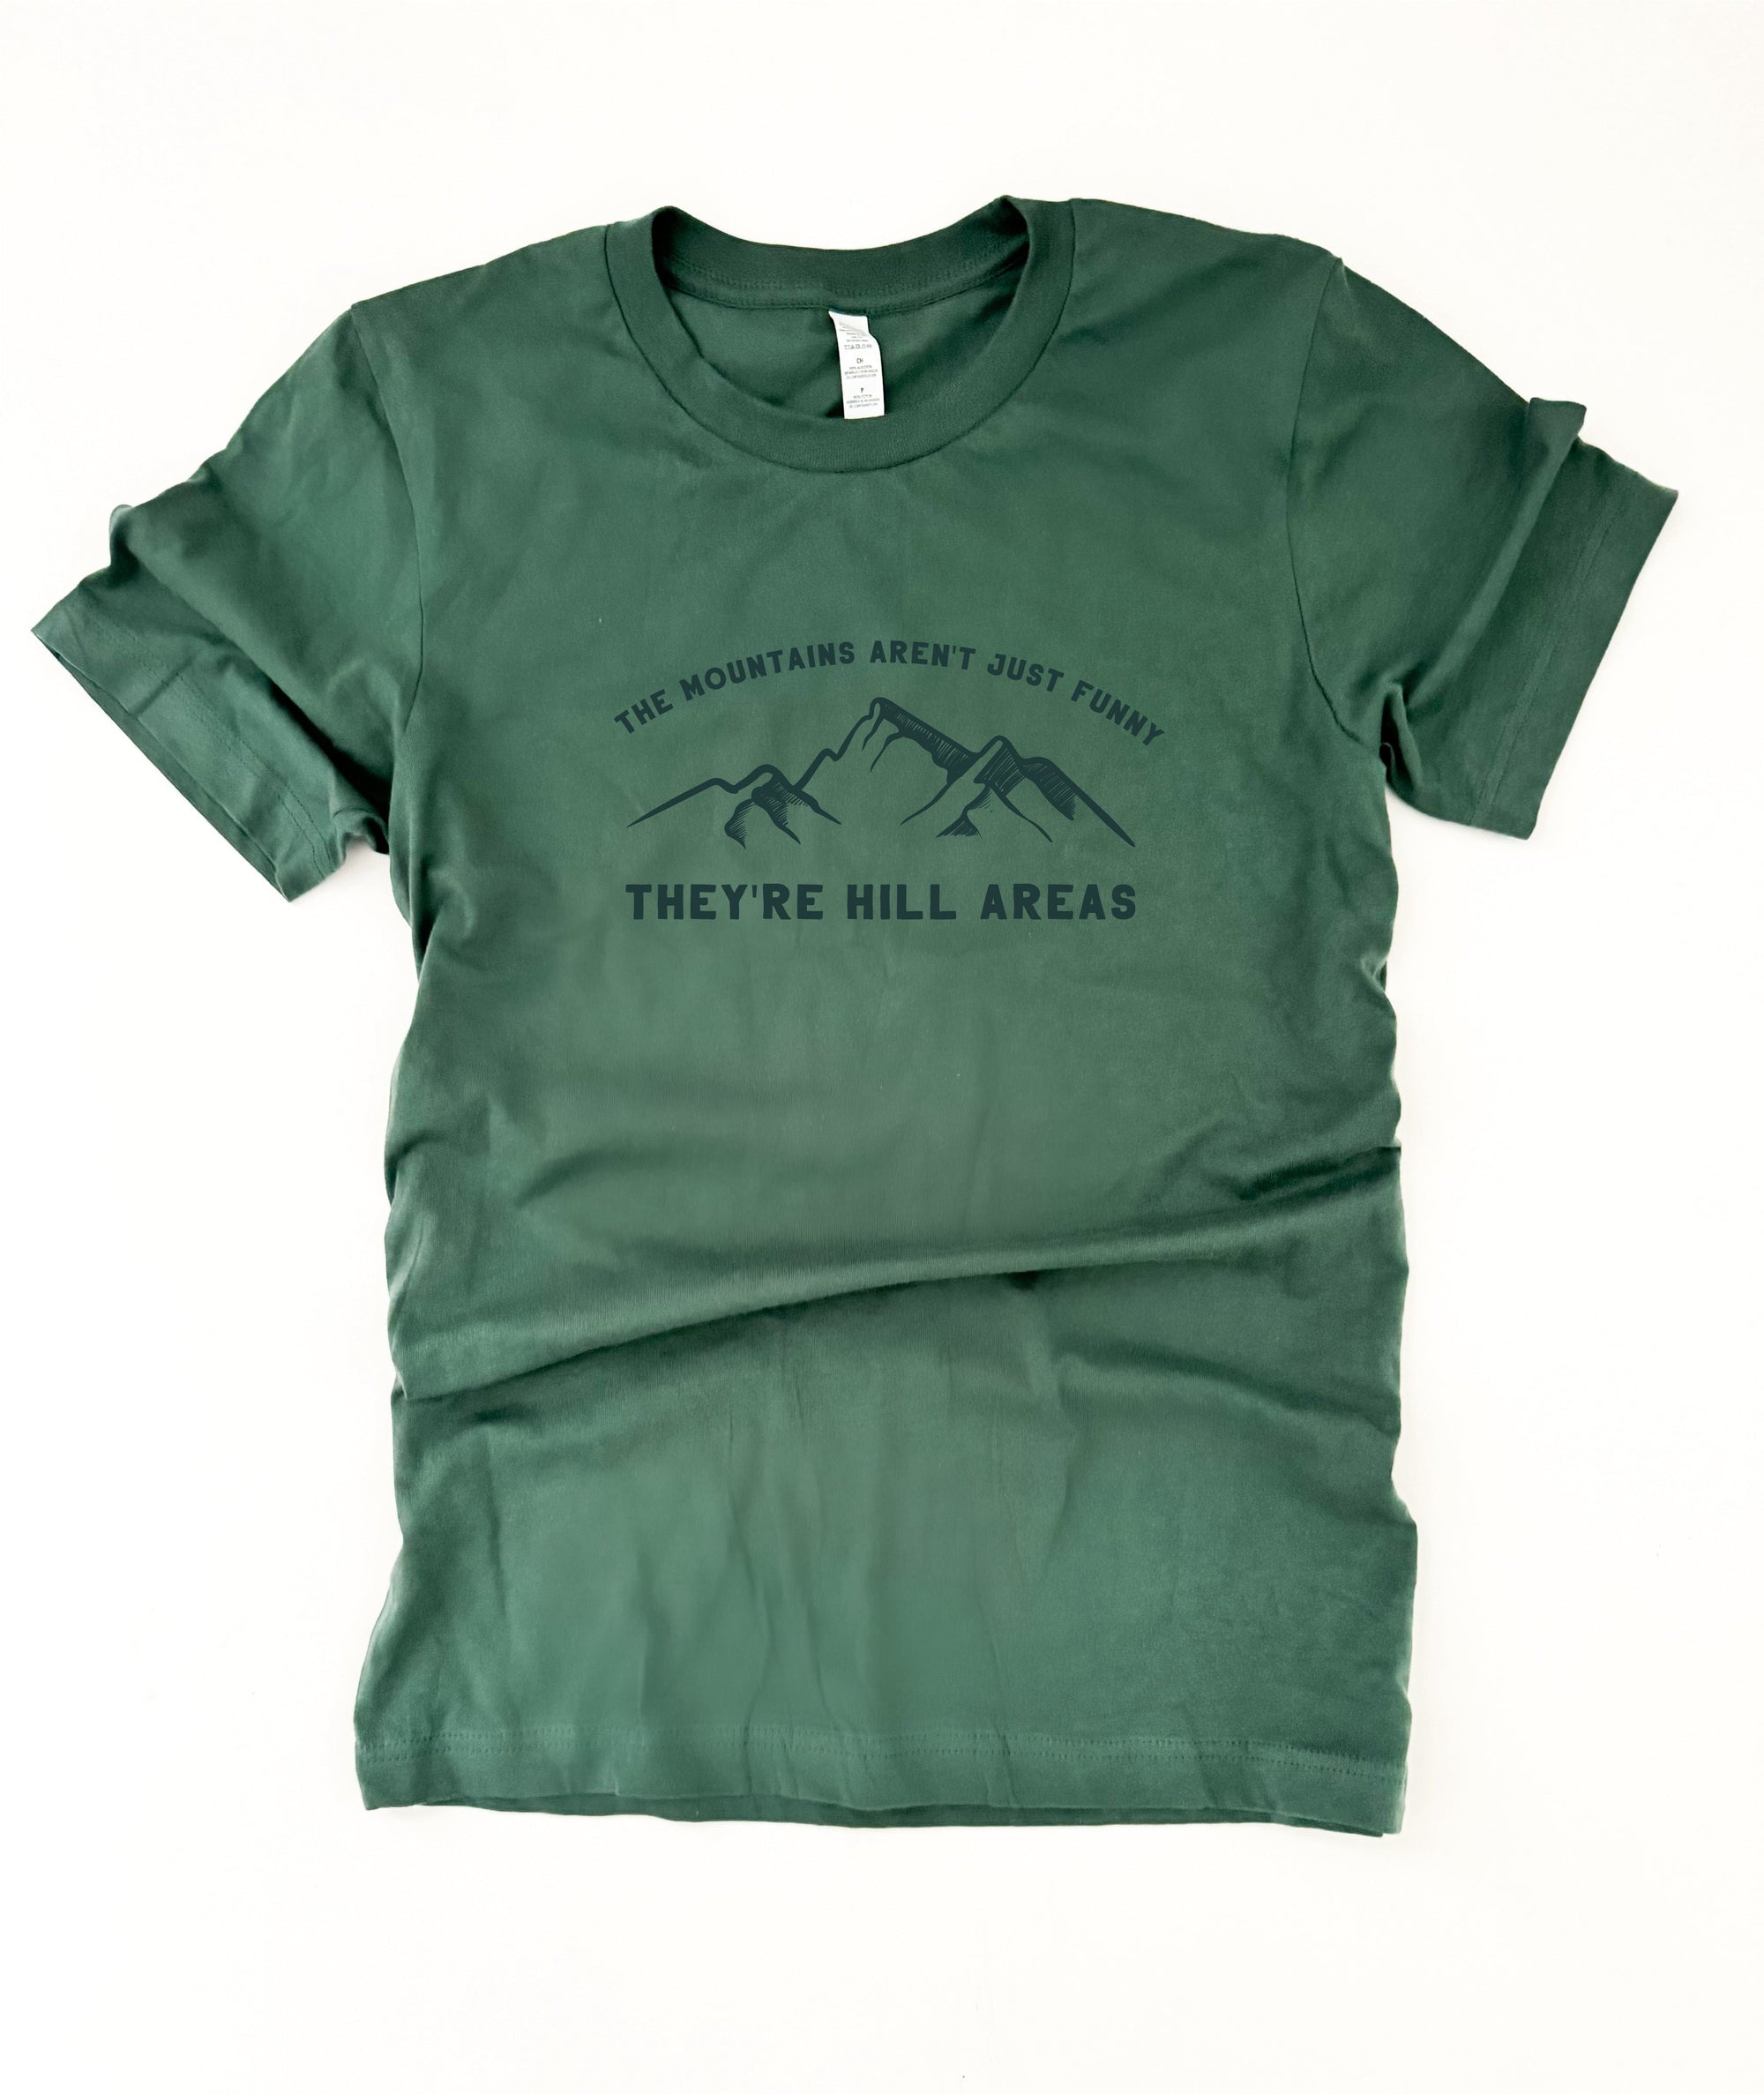 The mountains aren't just funny tee Short sleeve mens tee Bella Canvas 3001 slate and pine 